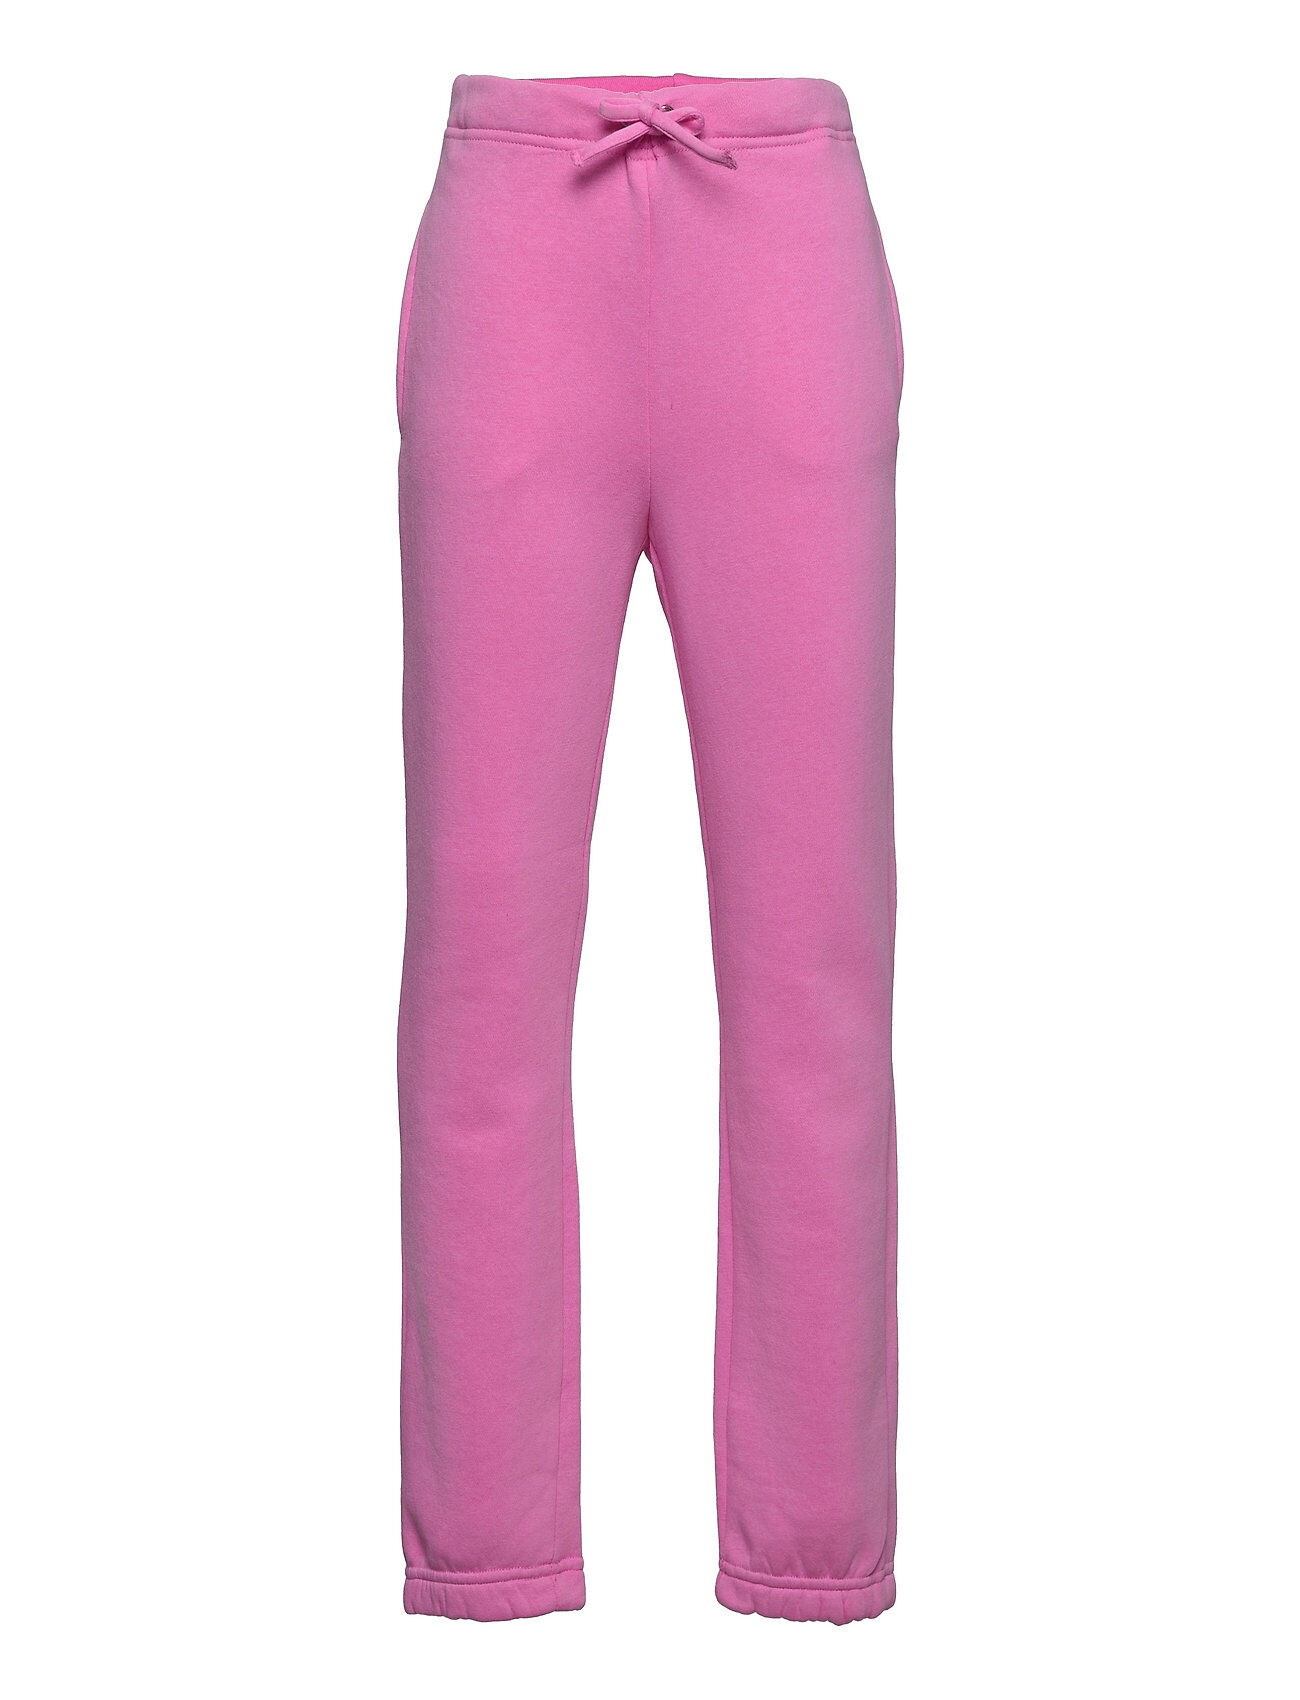 Kids Only K Very Life Mw Pull-Up Pant Pnt Joggebukser Pysjbukser Rosa Kids Only